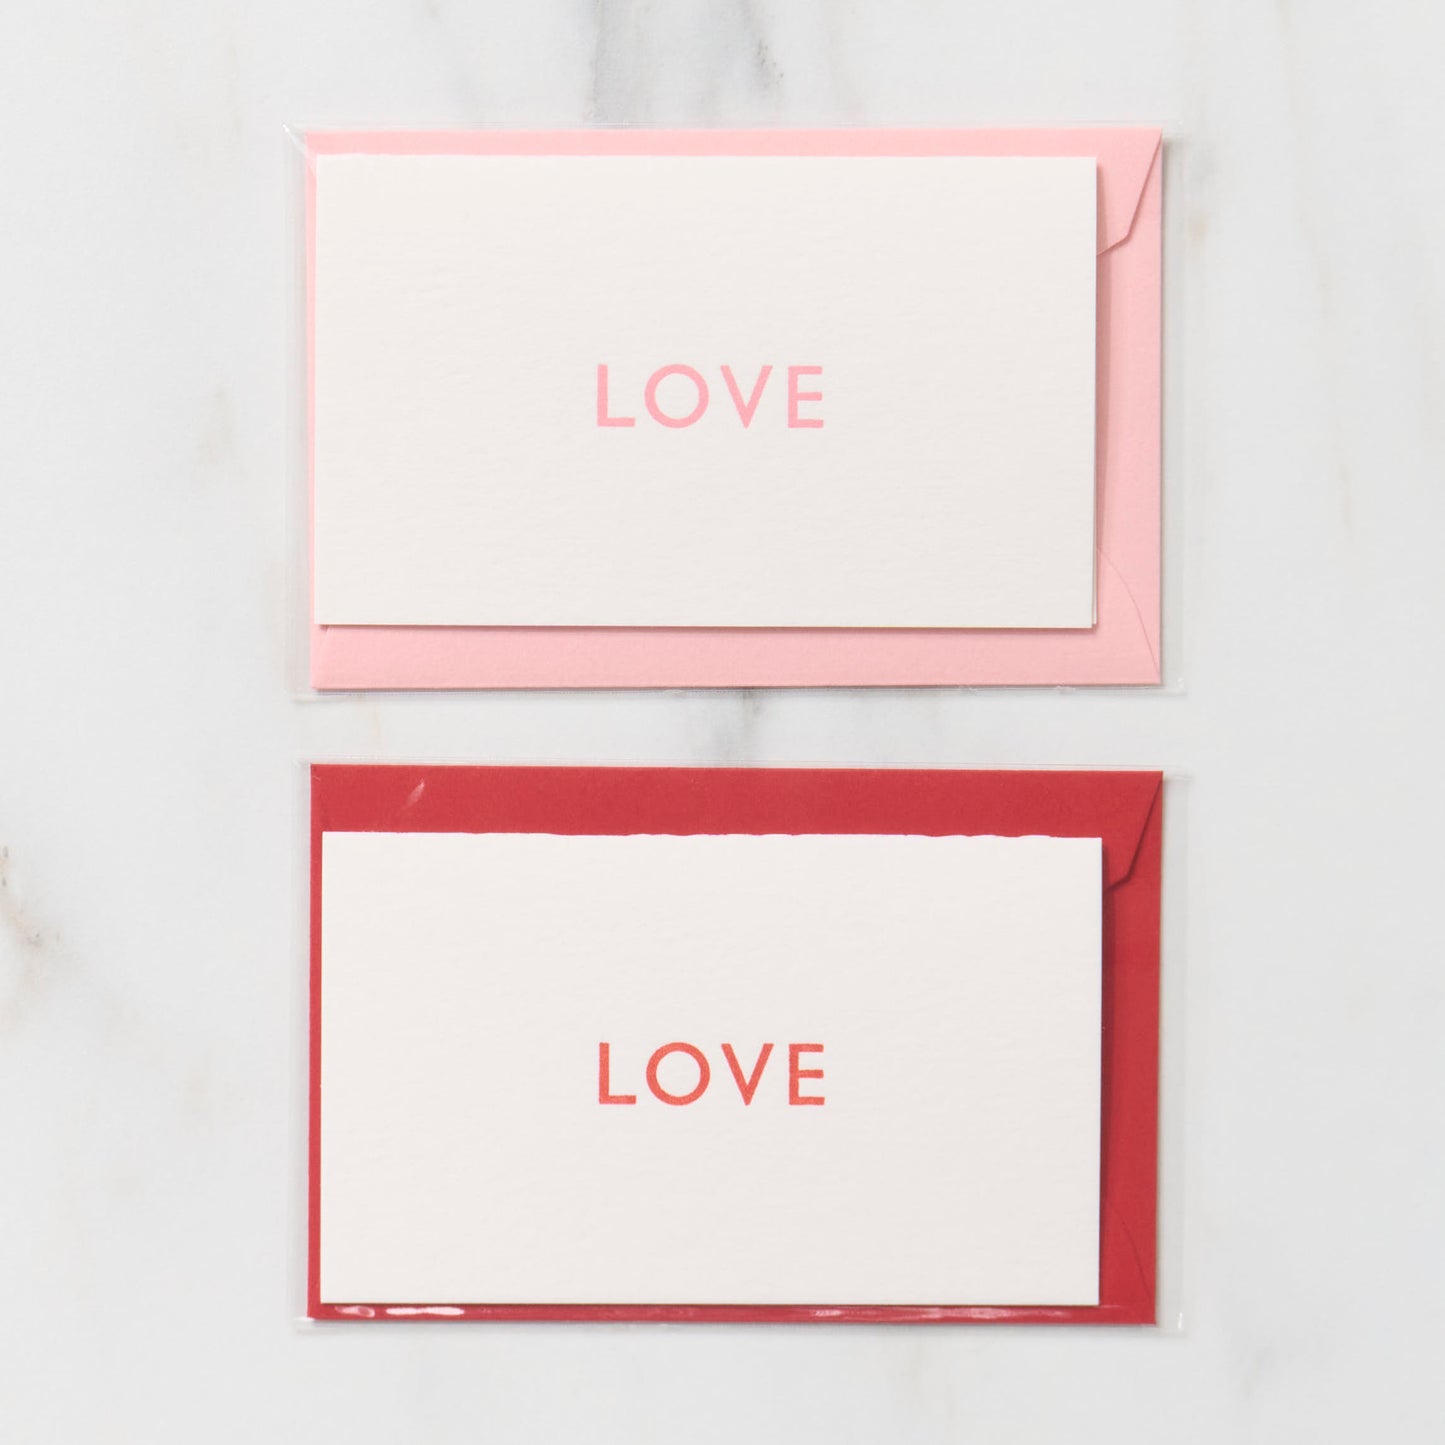 Mini 1 Word Greeting Cards / Letterpress Letters